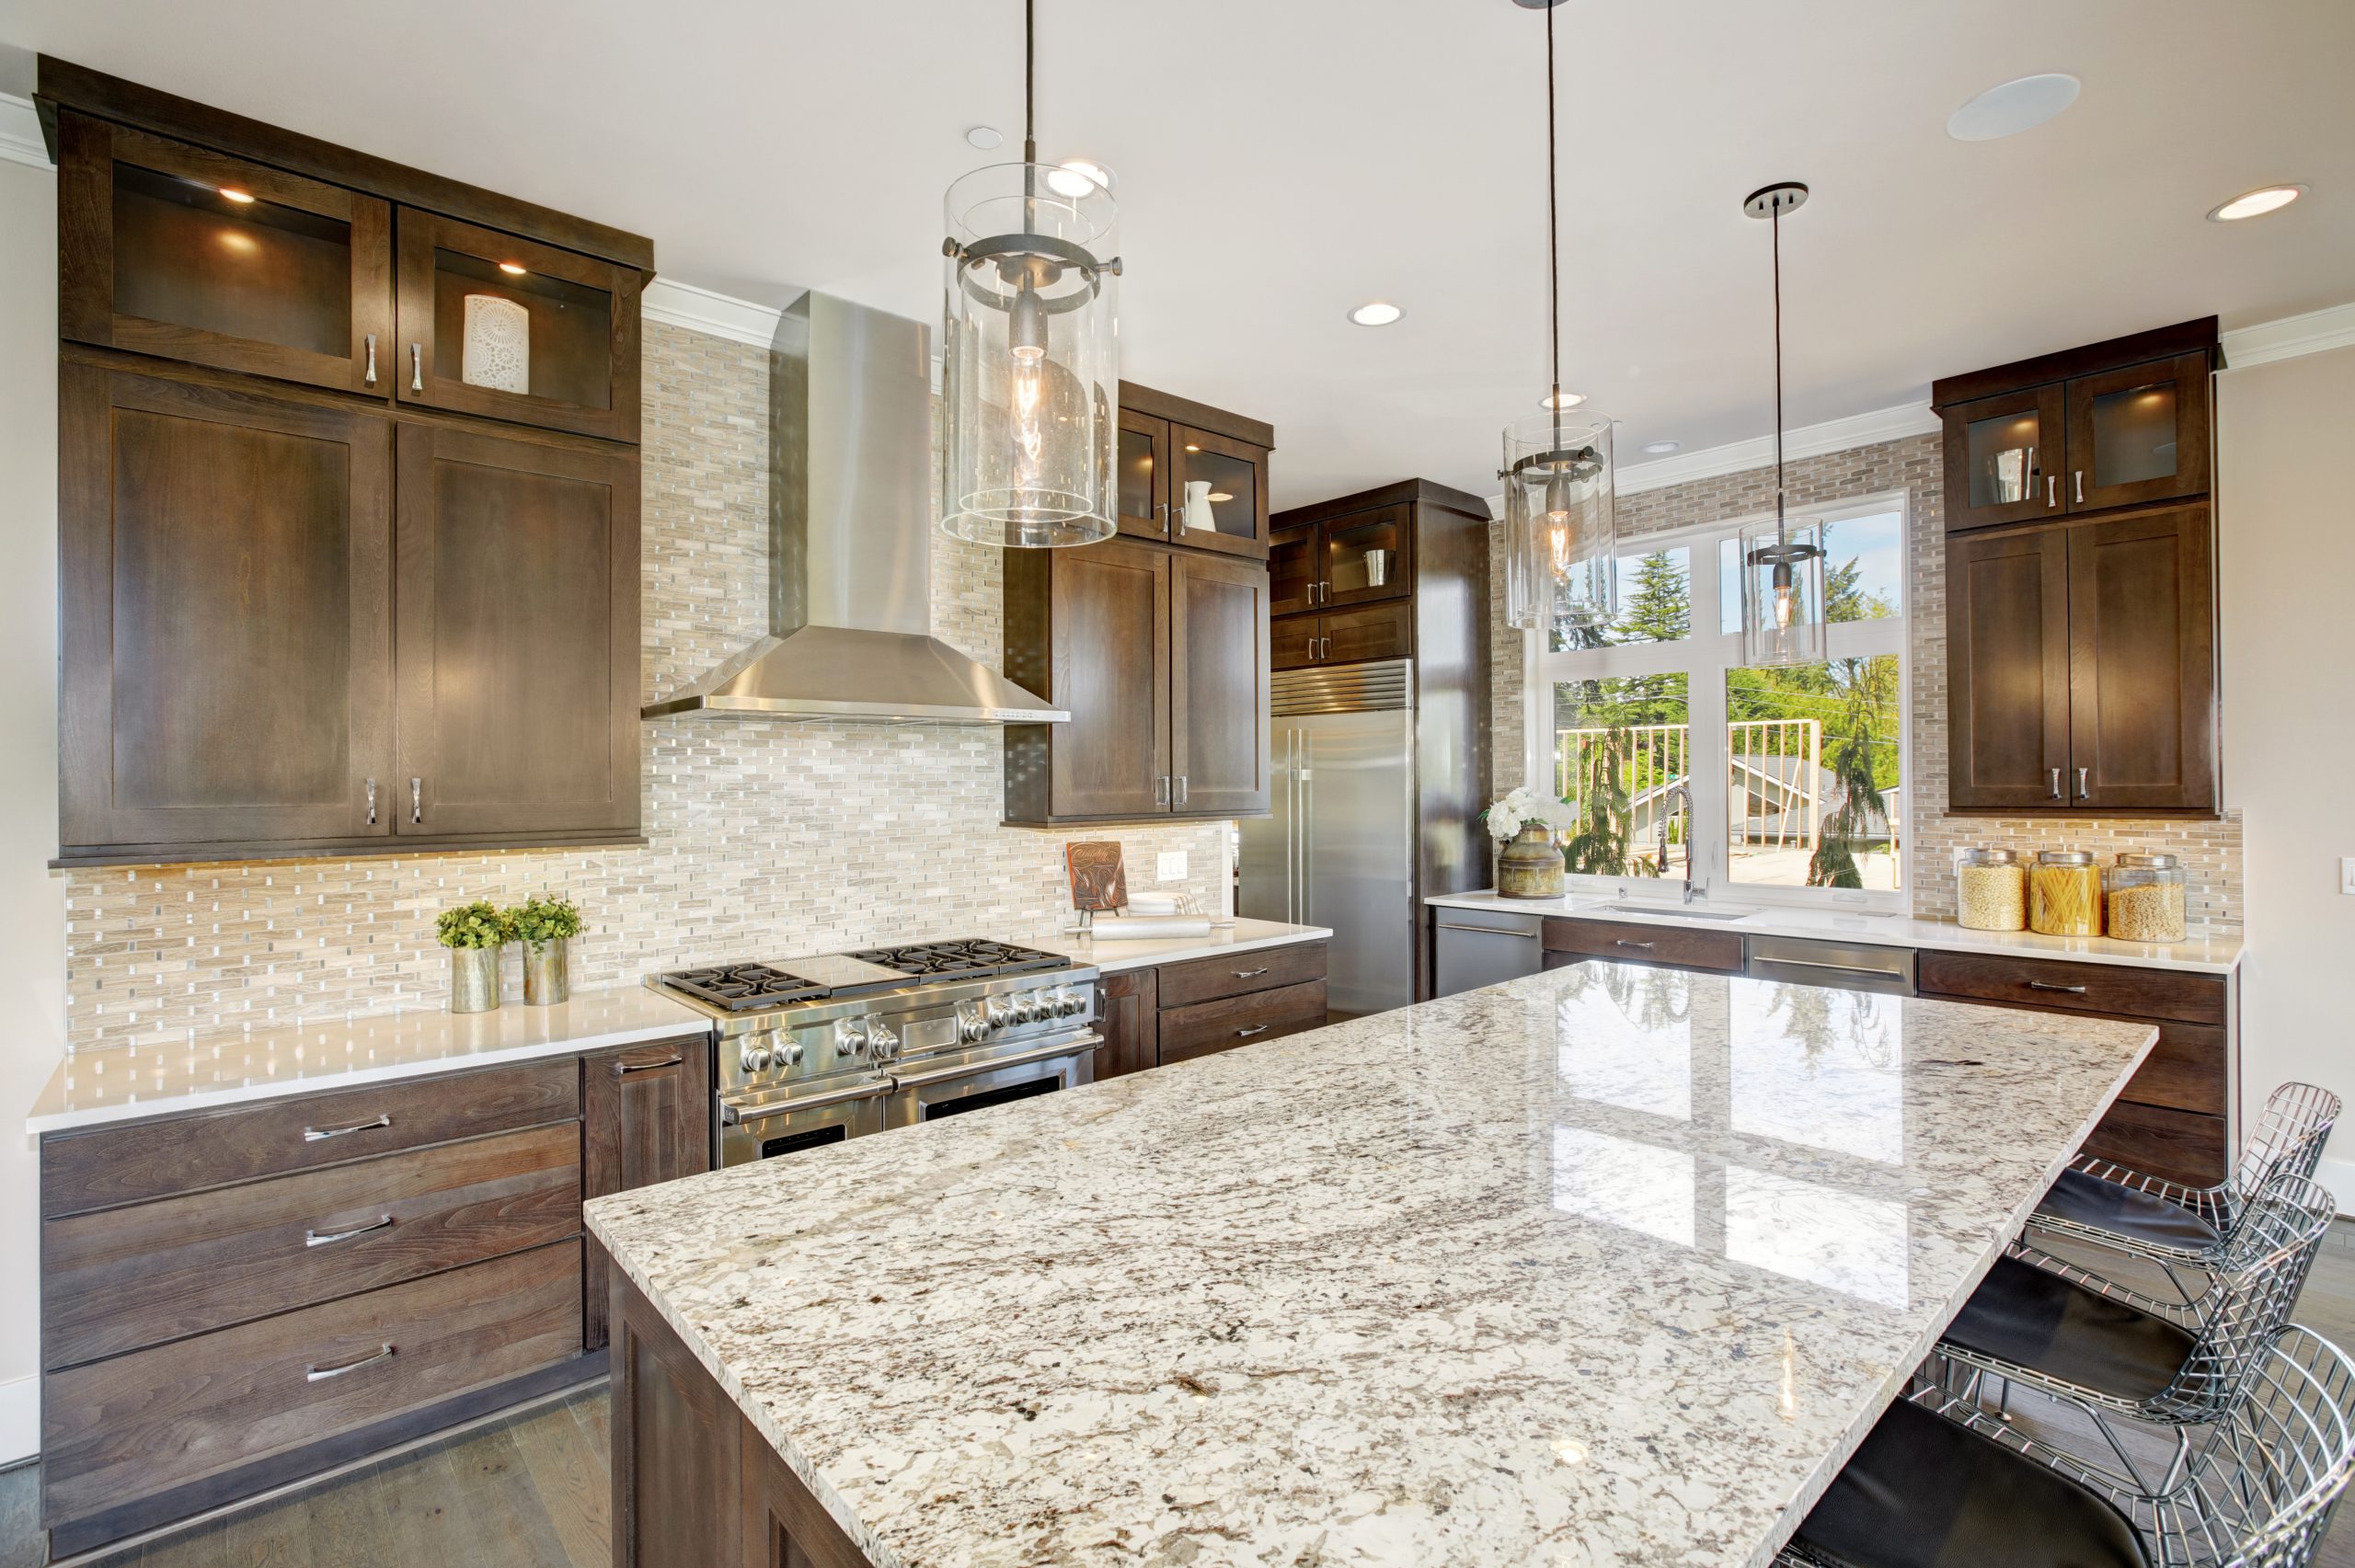 dark wooden custom kitchen cabinets with large island and granite countertops